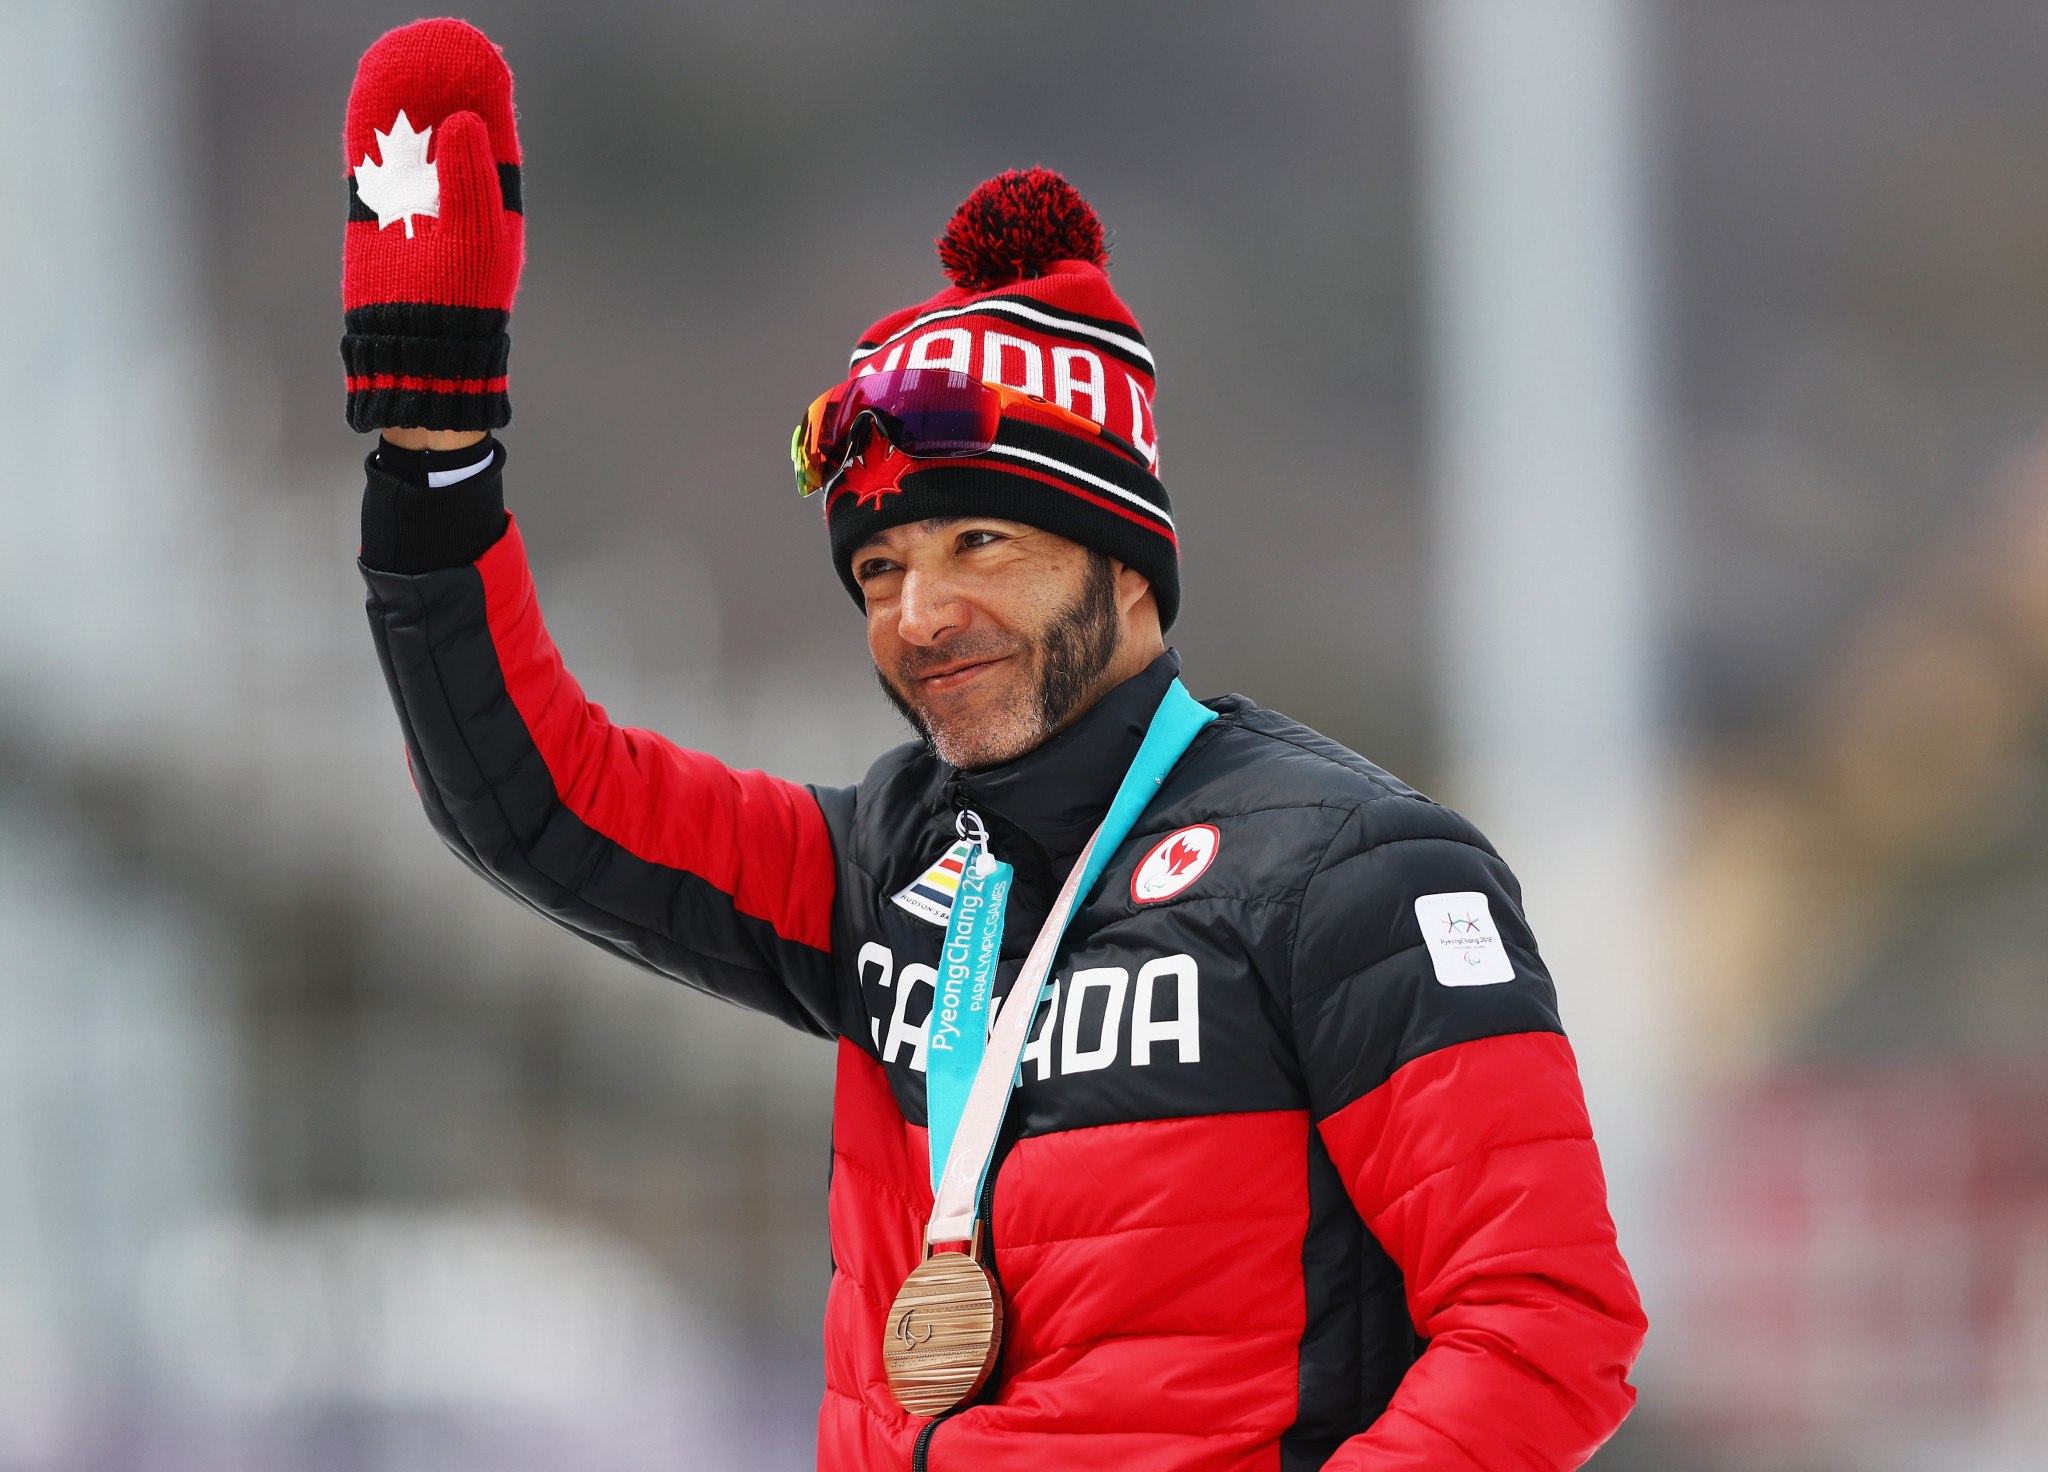 Cross-country skier Brian McKeever is now Canada's most decorated Winter Paralympian after taking his total to 17 medals with three gold and a bronze at Pyeongchang 2018 ©Getty Images